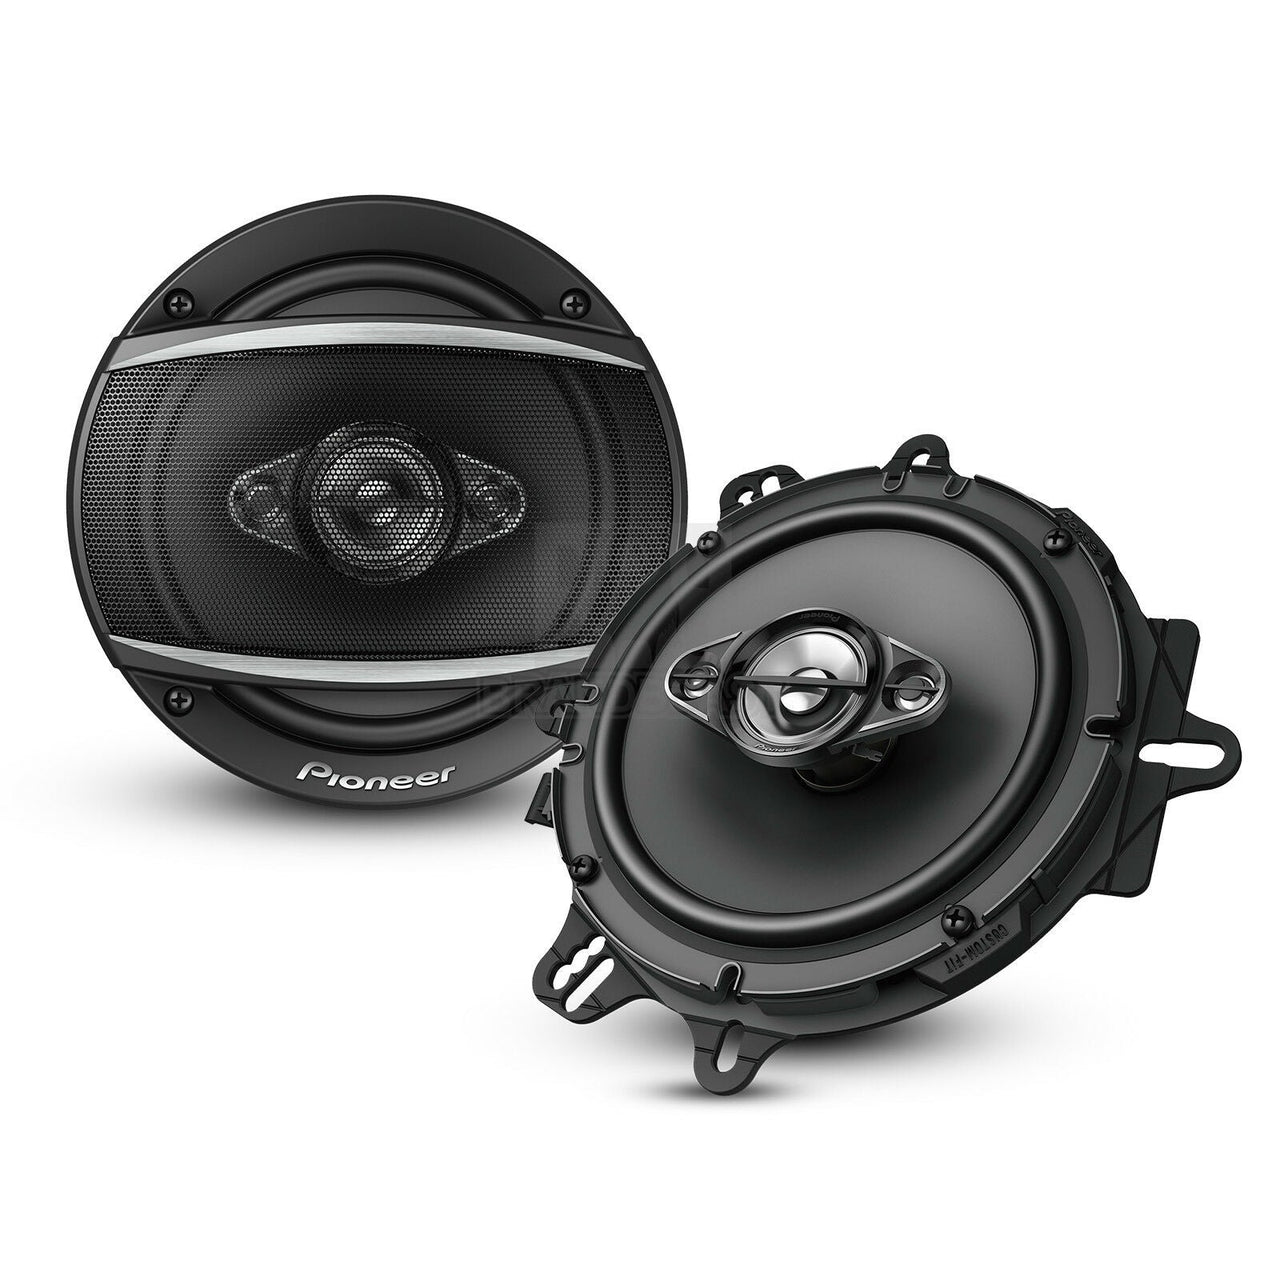 Pioneer TS-A1680F 6.5" Speaker<br/>350W Max A-Series 6.5" 4-Way Coaxial Speakers